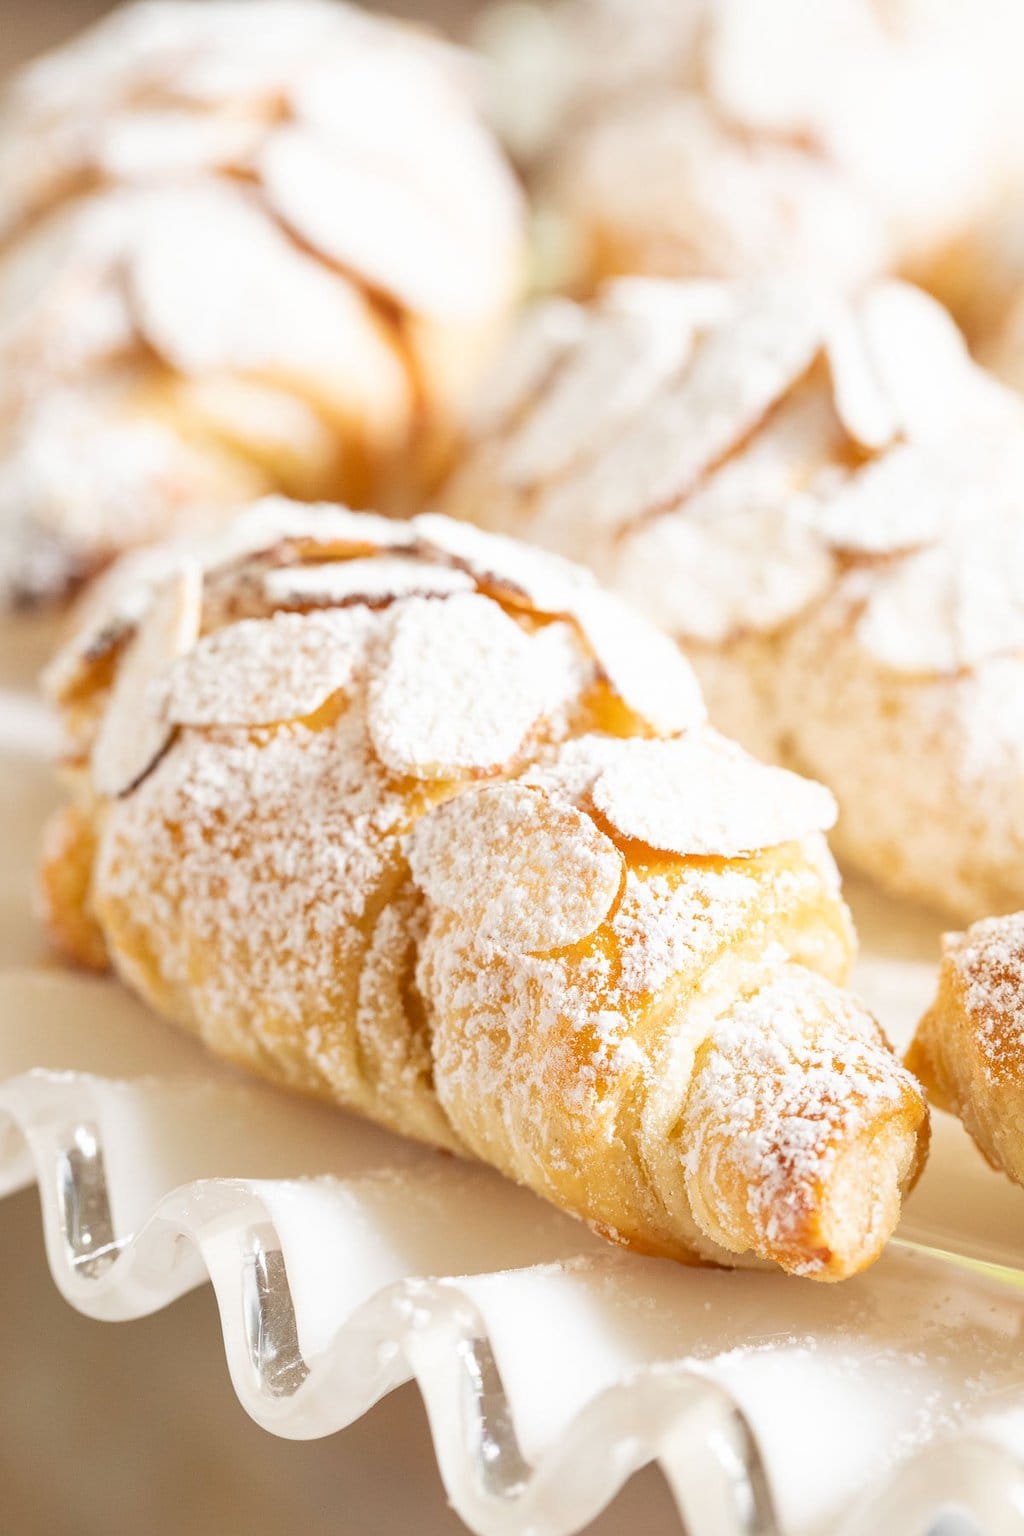 Vertical extreme closeup photo of Easy Almond Croissants on a white glass serving plate.